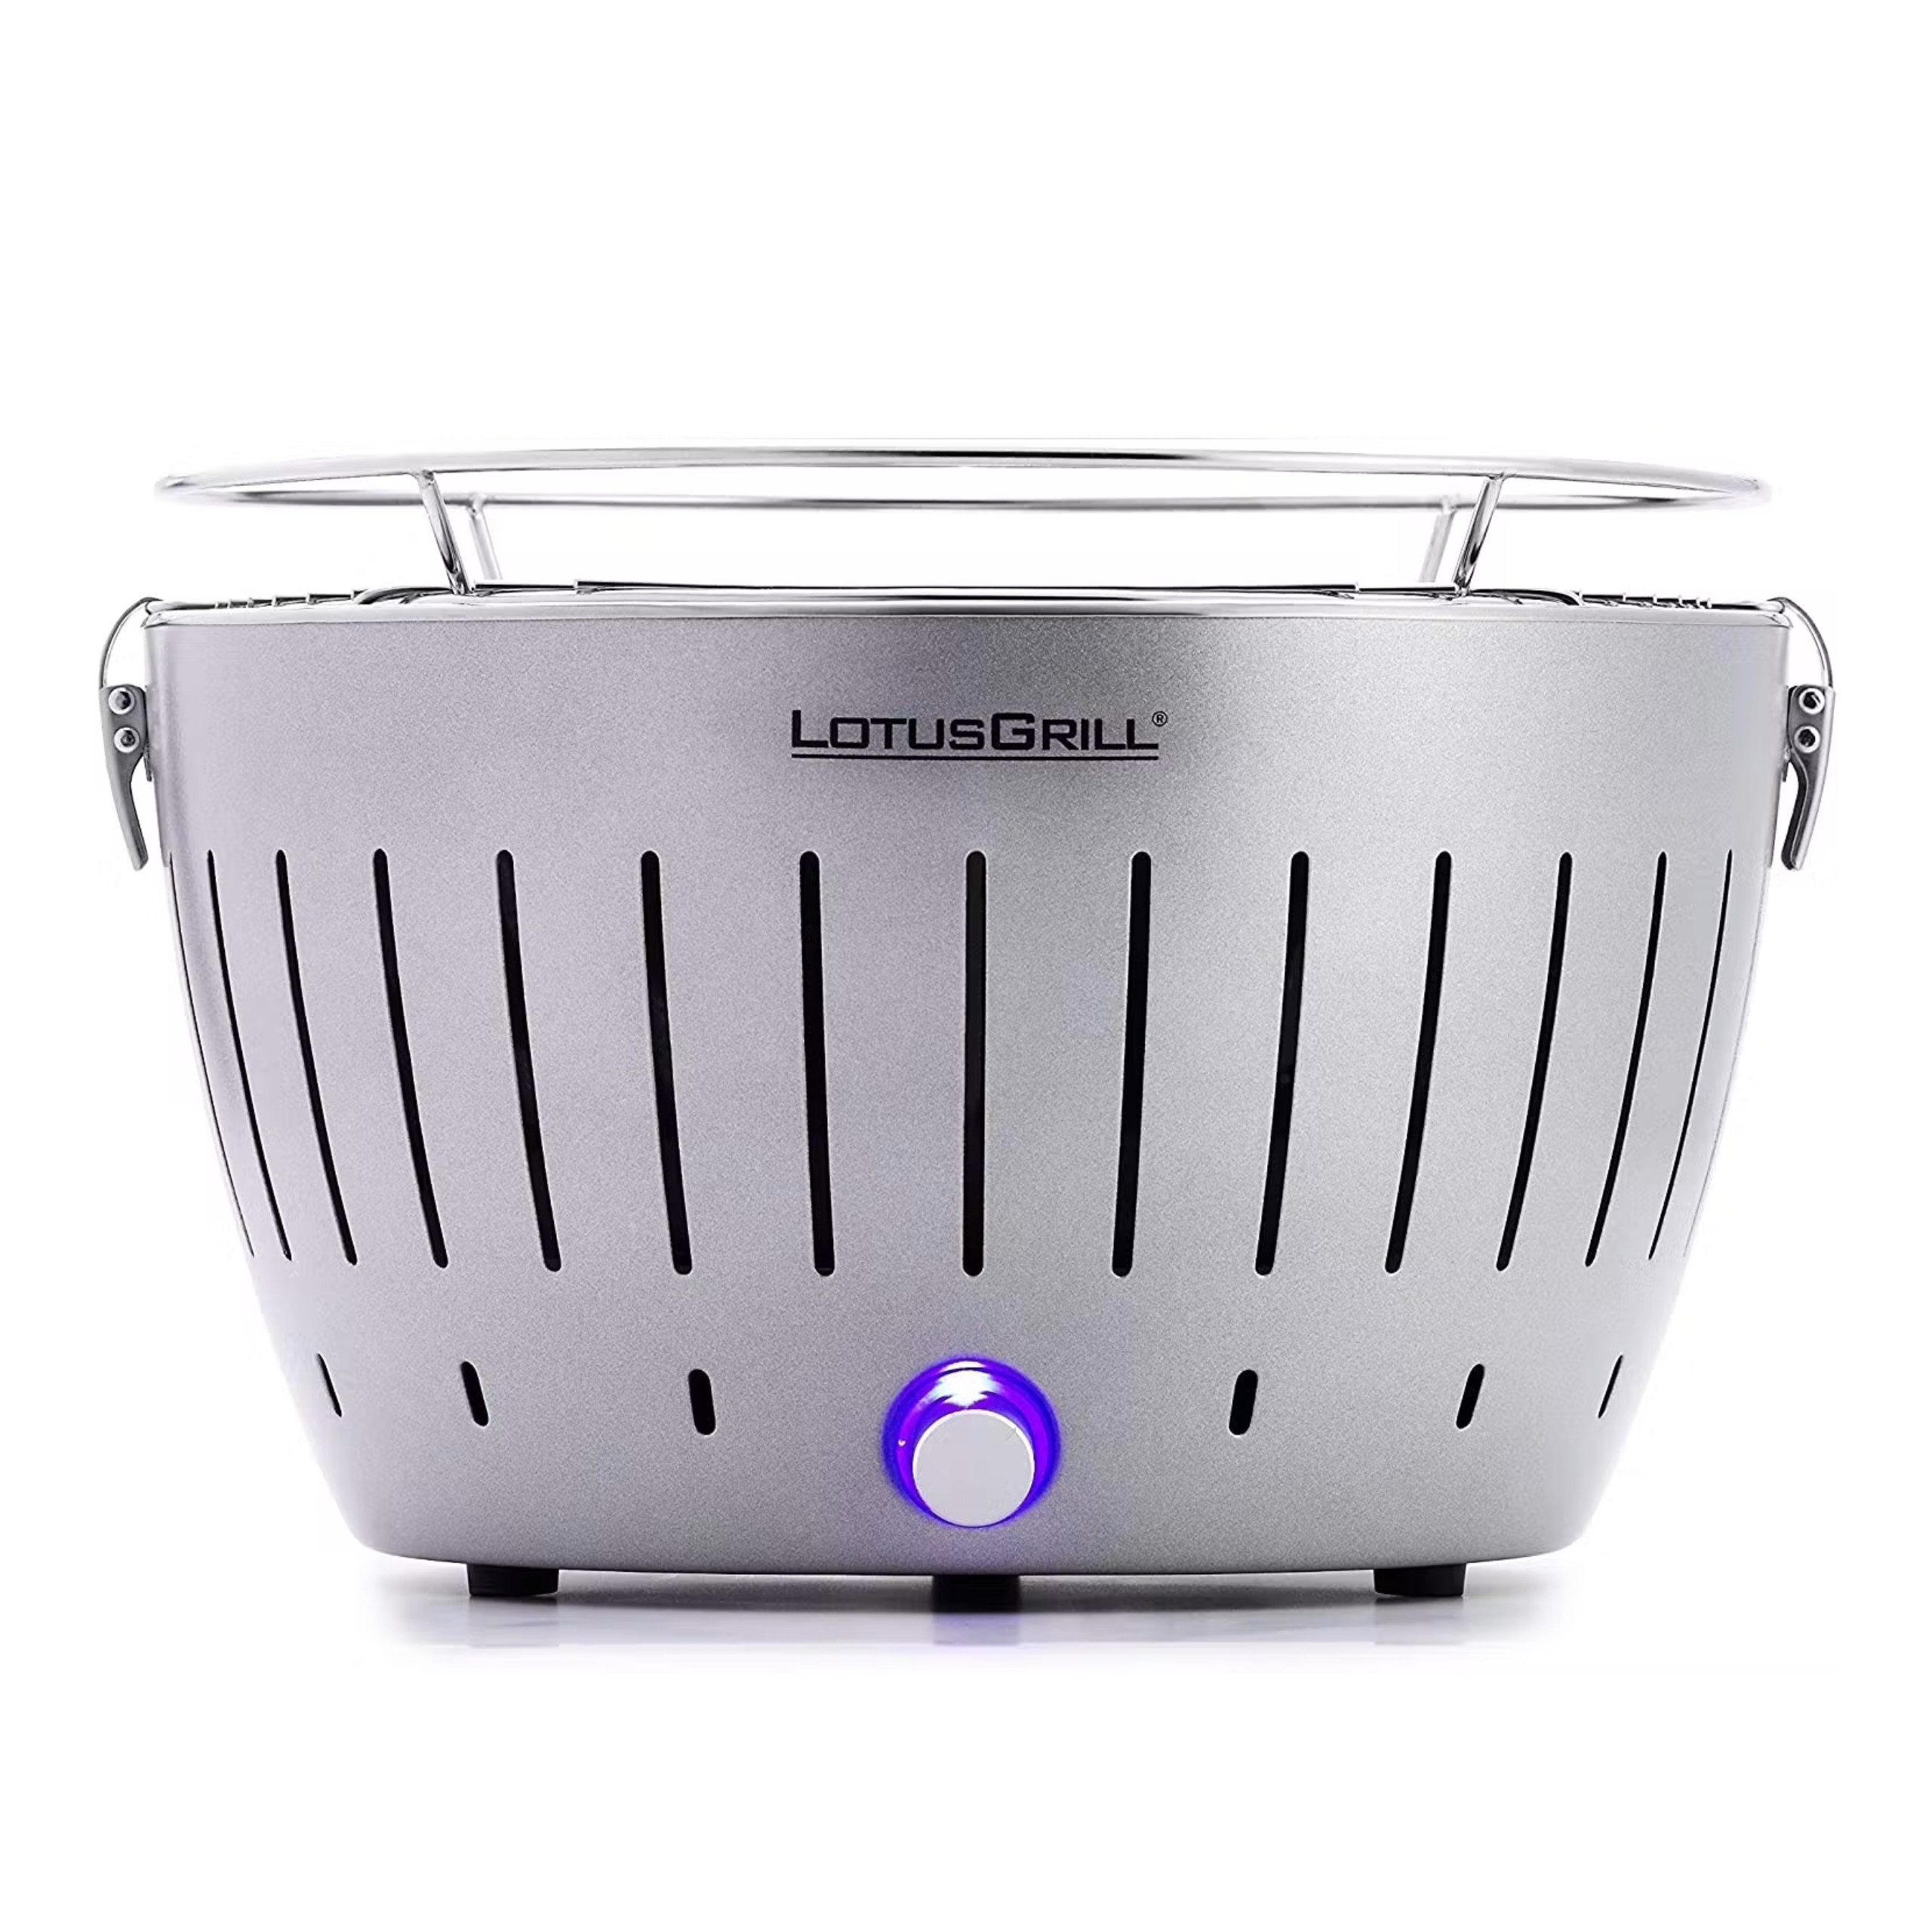 LotusGrill Holzkohlegrill LotusGrill Classic Silber Metallic G340 Holzkohlegrill Tischgrill